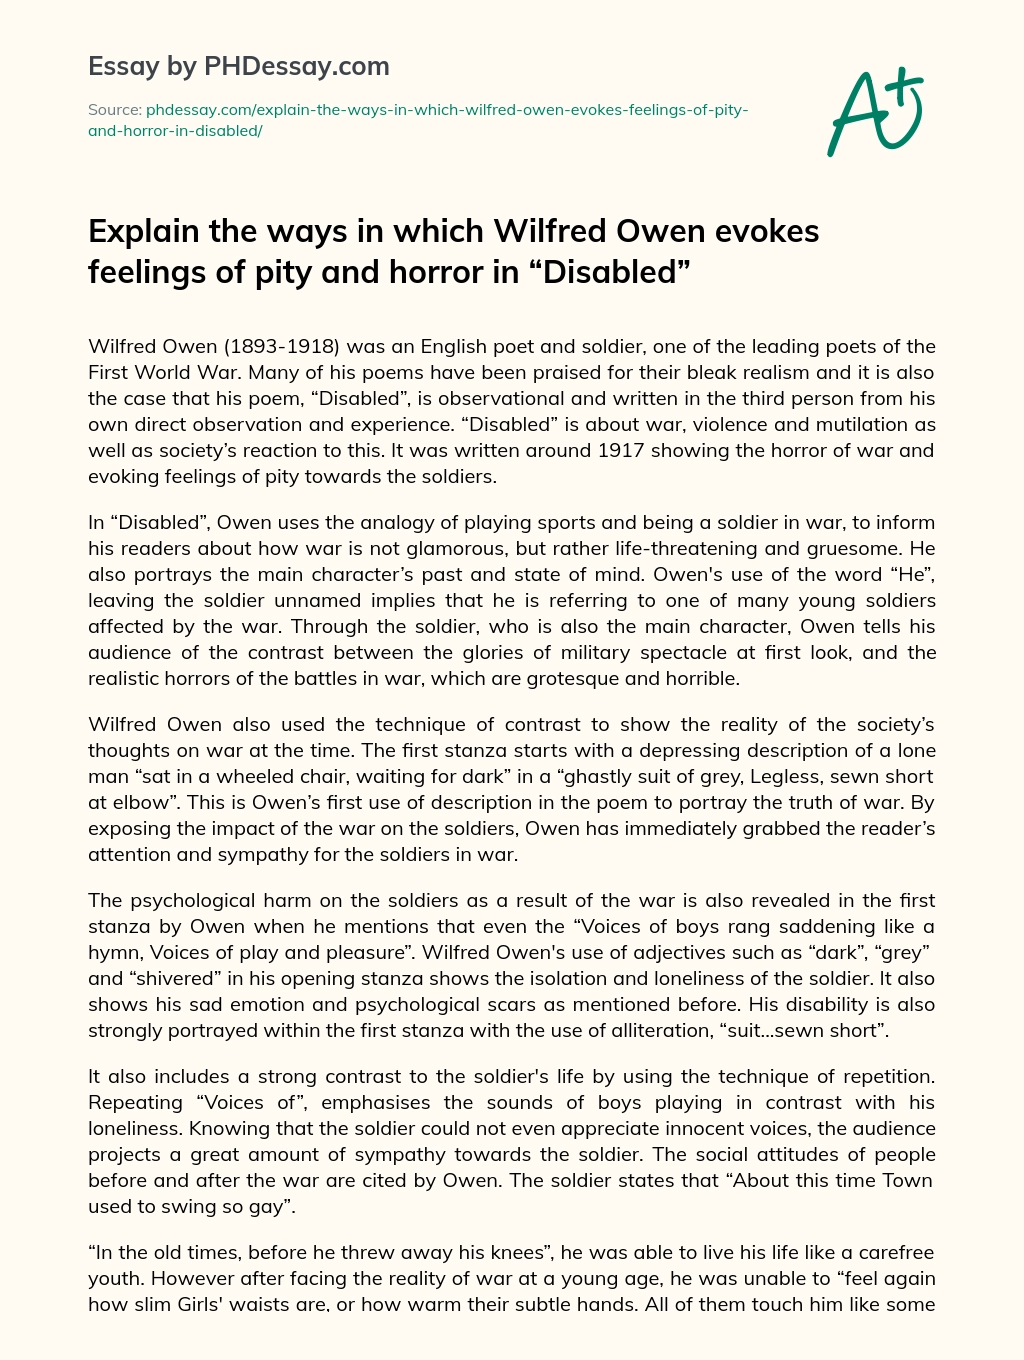 Wilfred Owen’s Disabled: A Bleak Realism of War and Society’s Reaction essay